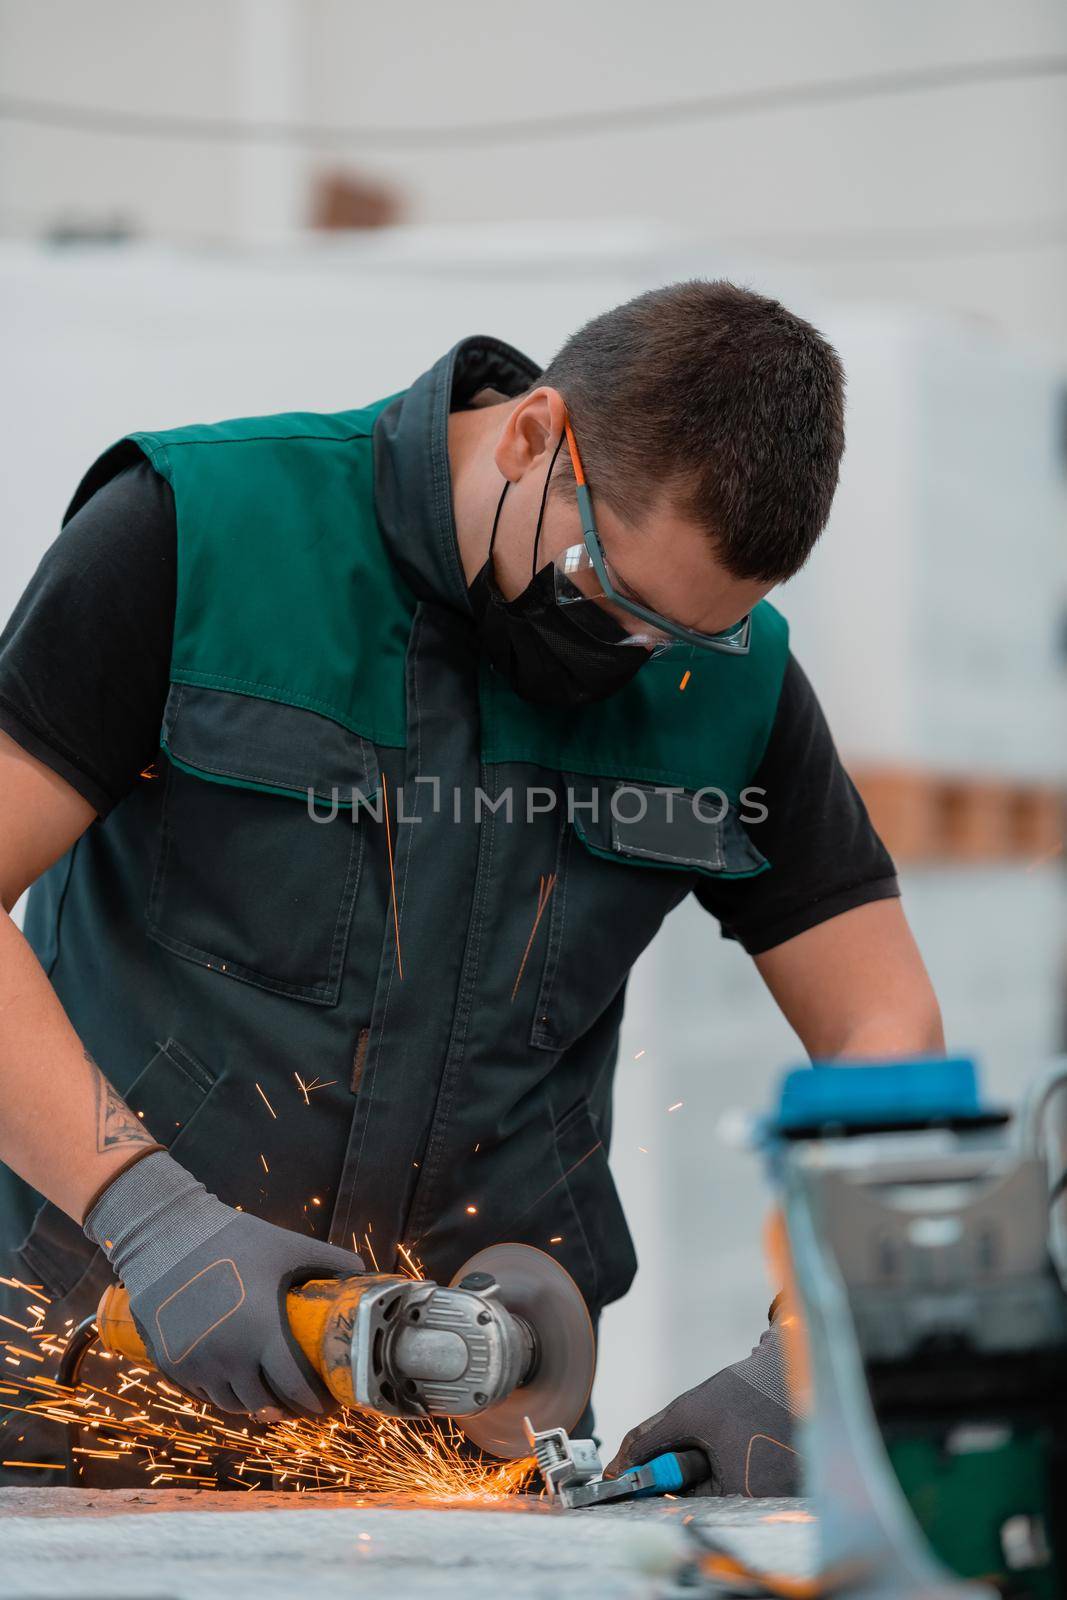 Heavy Industry Engineering Factory Interior with Industrial Worker Using Angle Grinder and Cutting a Metal Tube.He Wears a Mask on His Face Because of the Coronavirus Pandemic. High quality photo